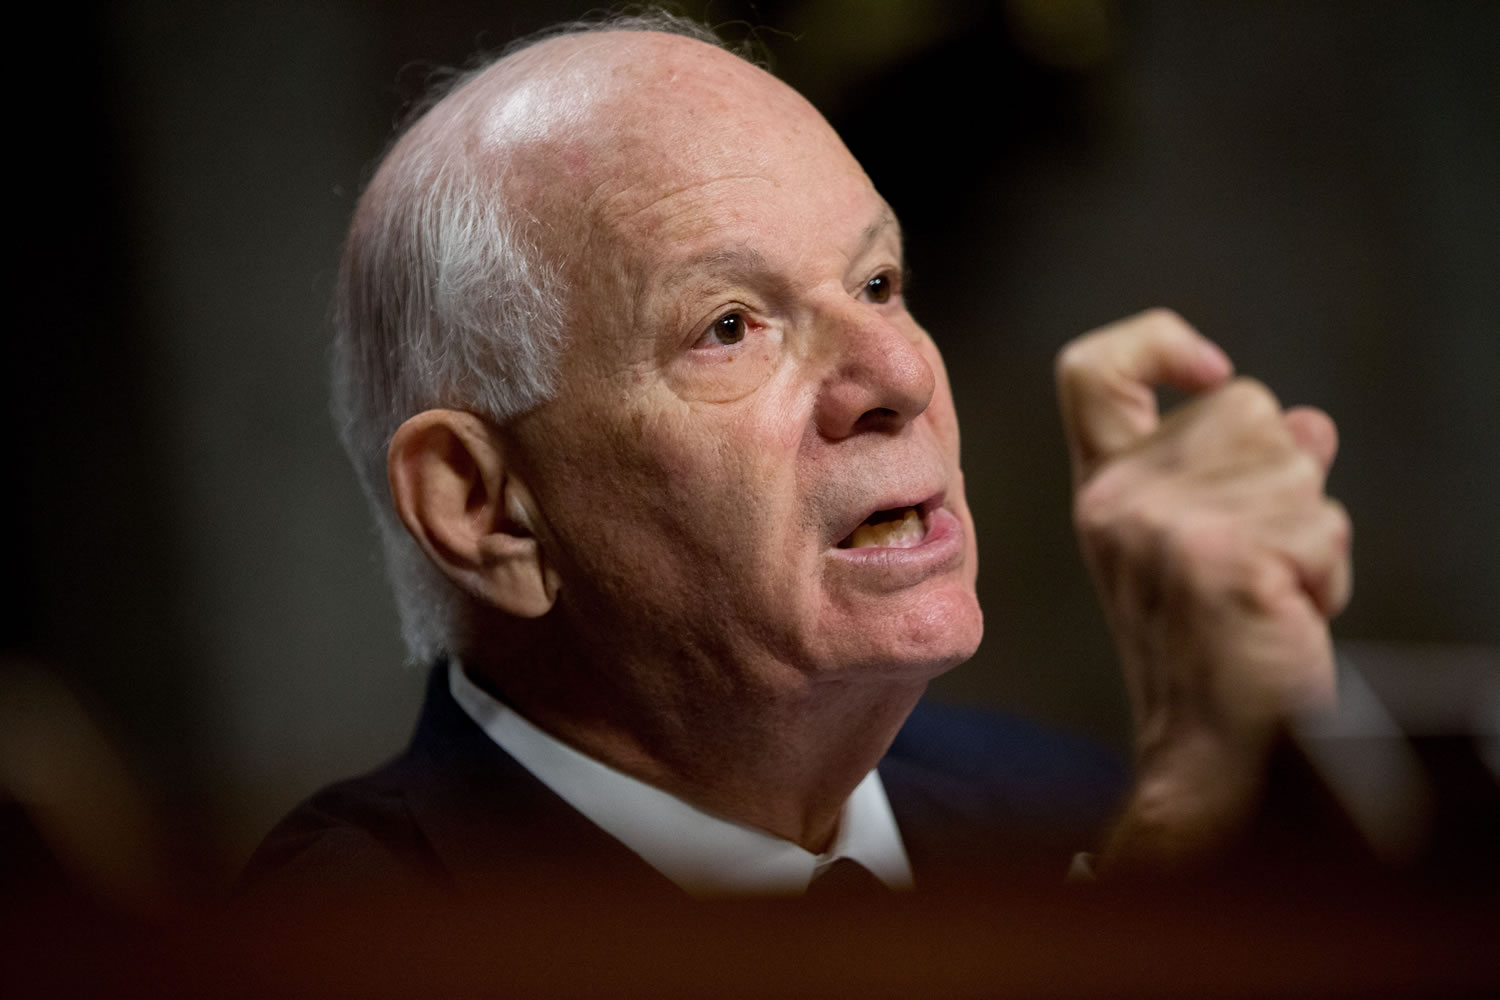 Ranking Member Sen. Ben Cardin, D-Md. is seen during July 23 a Senate Foreign Relations Committee hearing on Capitol Hill to review the Iran nuclear agreement. Cardin, the top Democrat on the Foreign Relations Committee, has announced he opposes the nuclear deal with Iran.